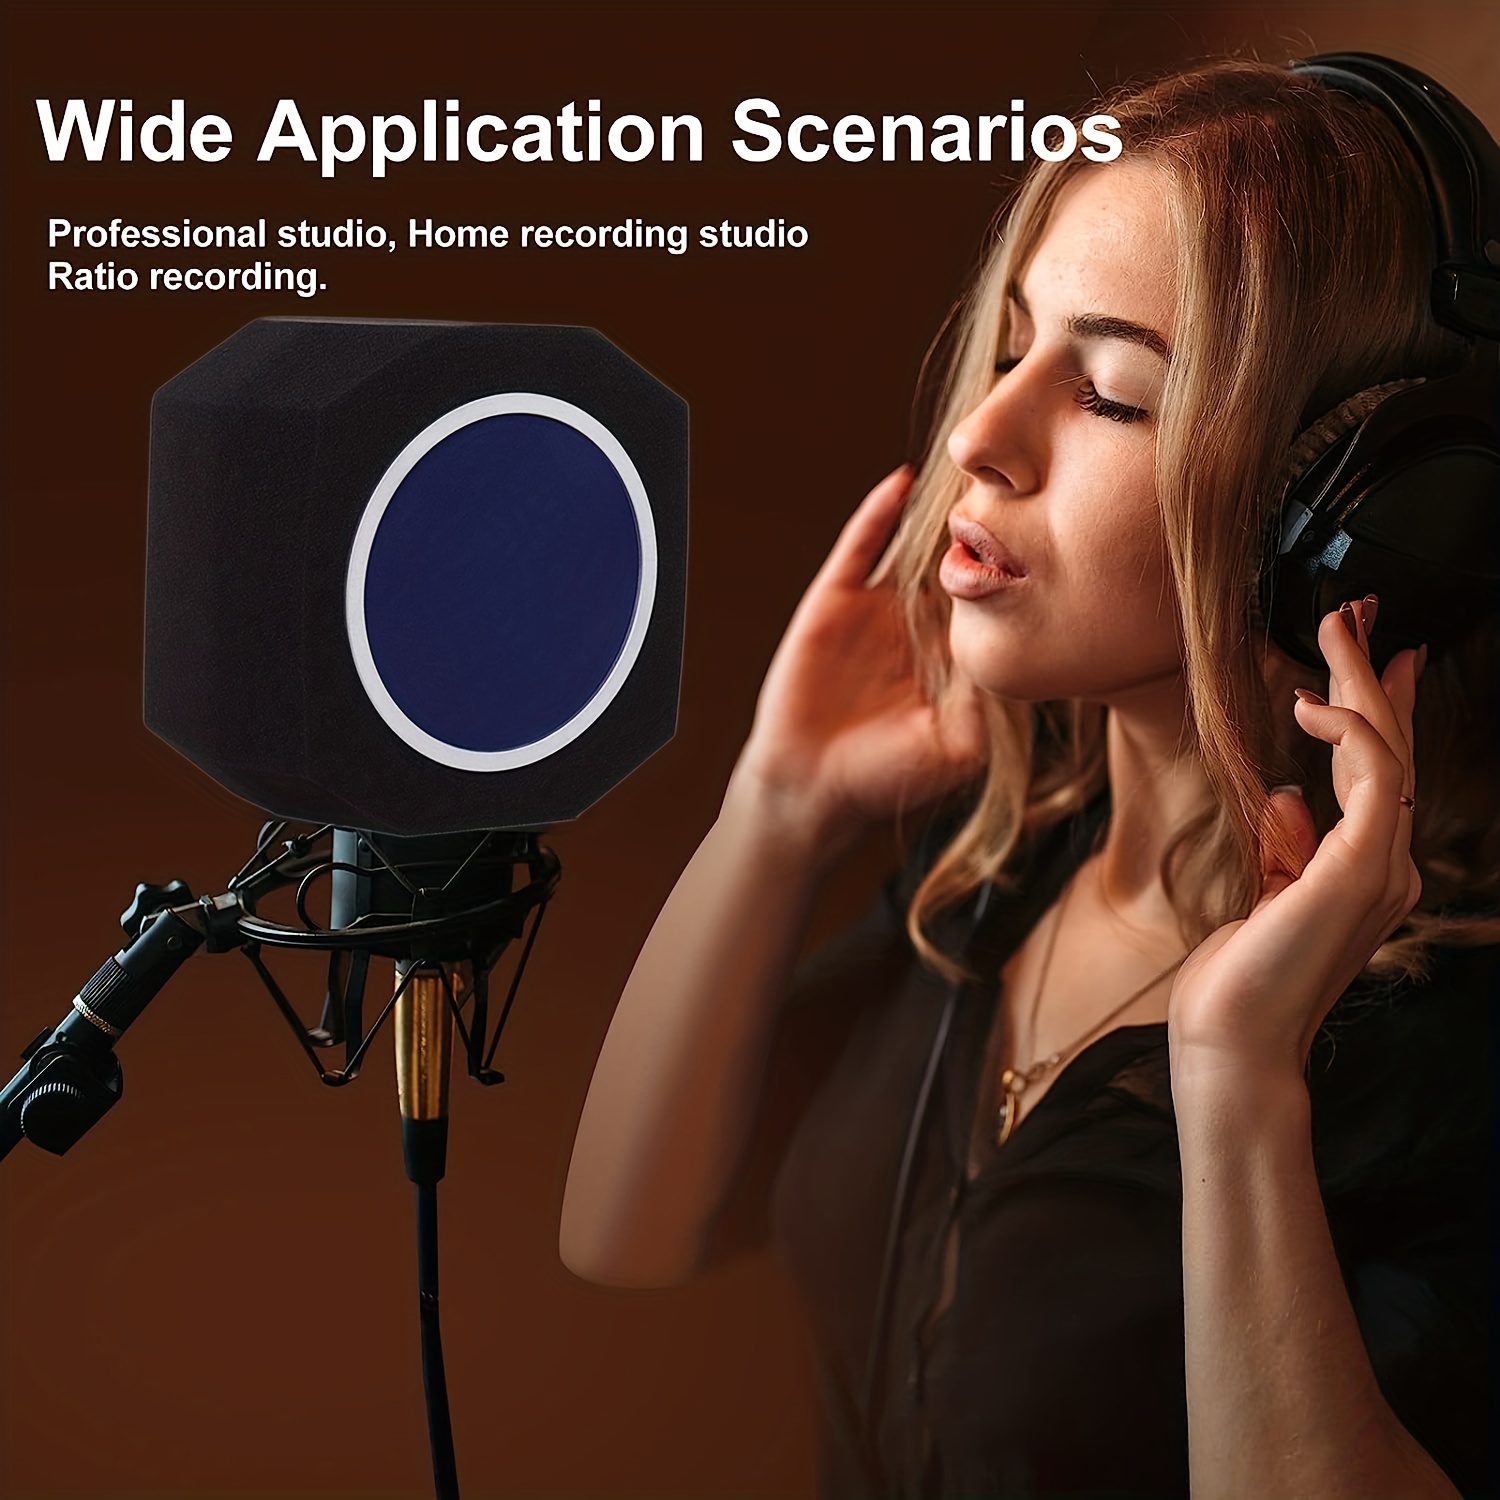 Microphone Wind Shield Pop Filter Isolation Ball, Acoustic Filter